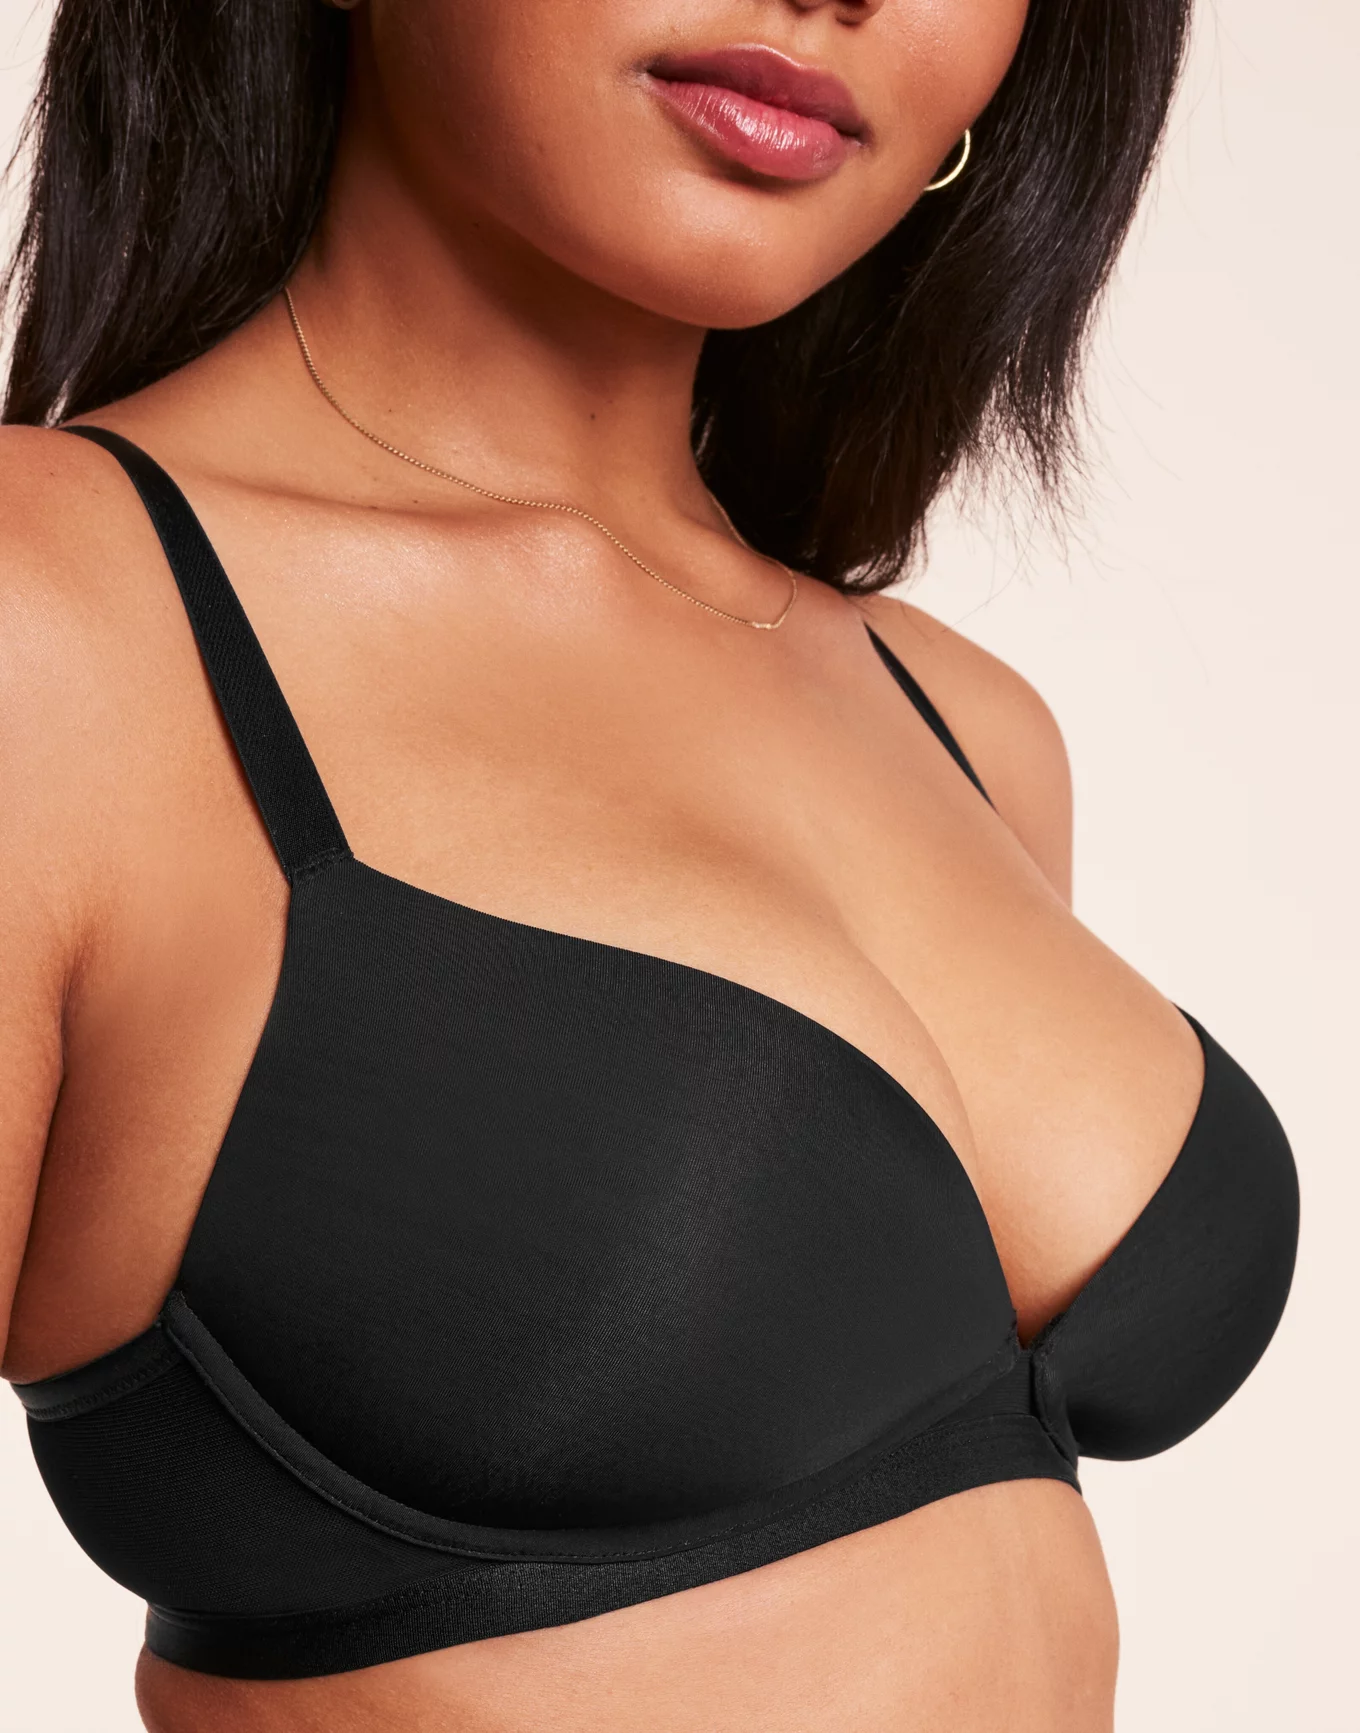 Adore Me Super sexy 34DDD Push Up bra Black Size 34 F / DDD - $36 (38% Off  Retail) New With Tags - From Heather